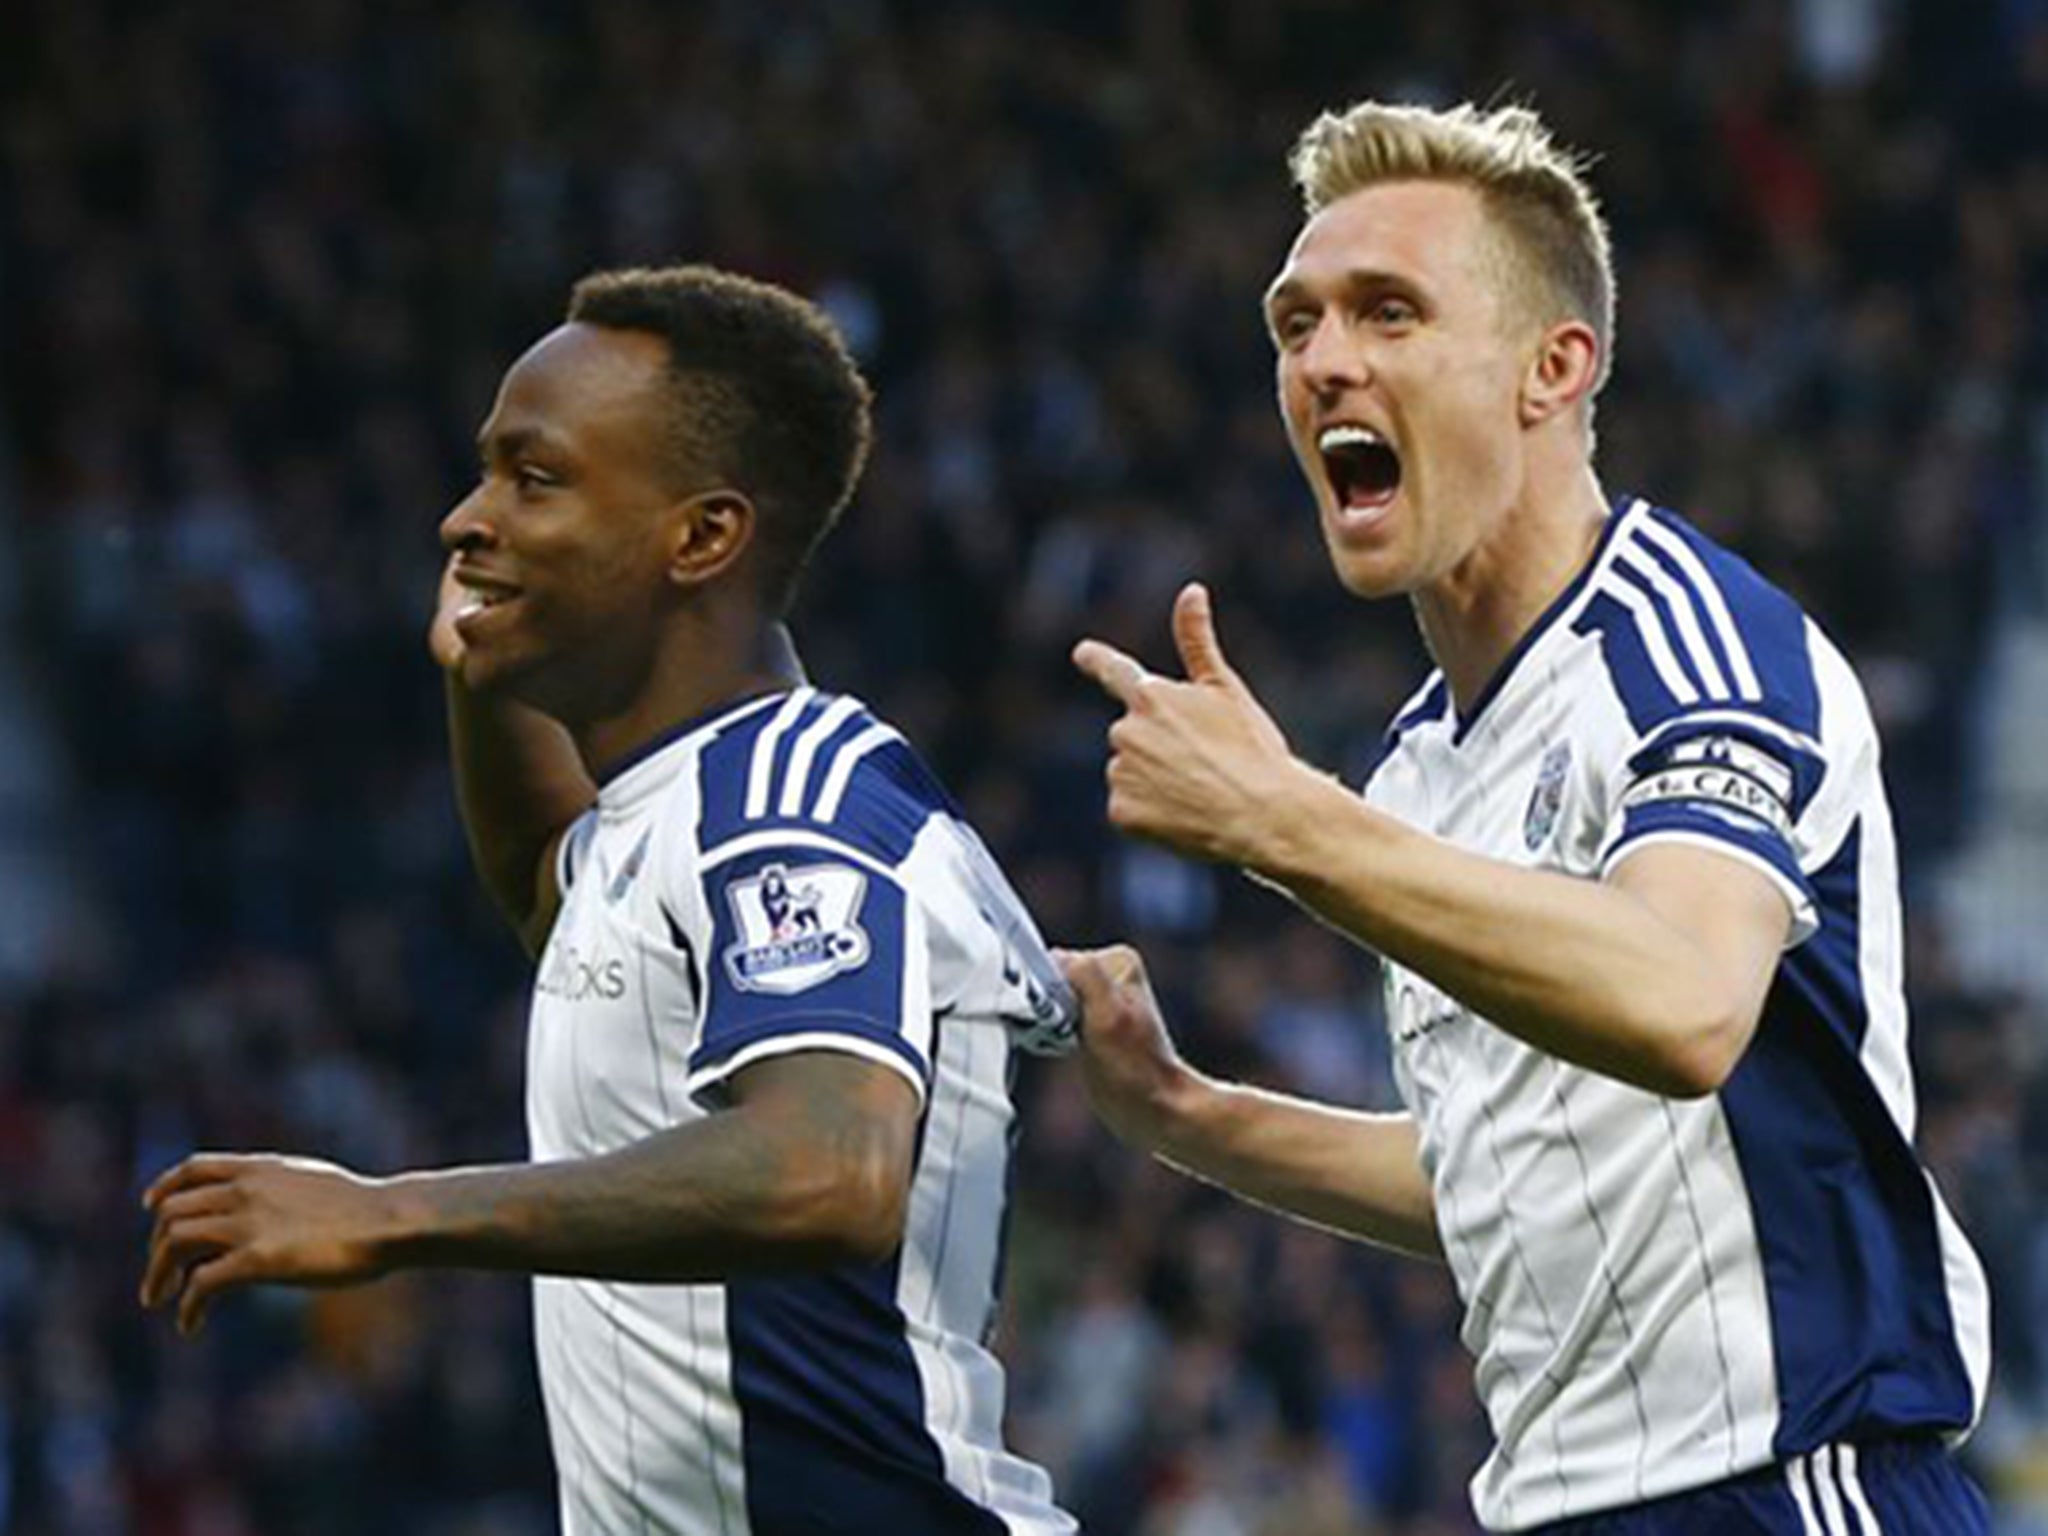 West Bromwich’s captain, Darren Fletcher, right, leads the applause for Saido Berahino’s opening goal against Chelsea last night